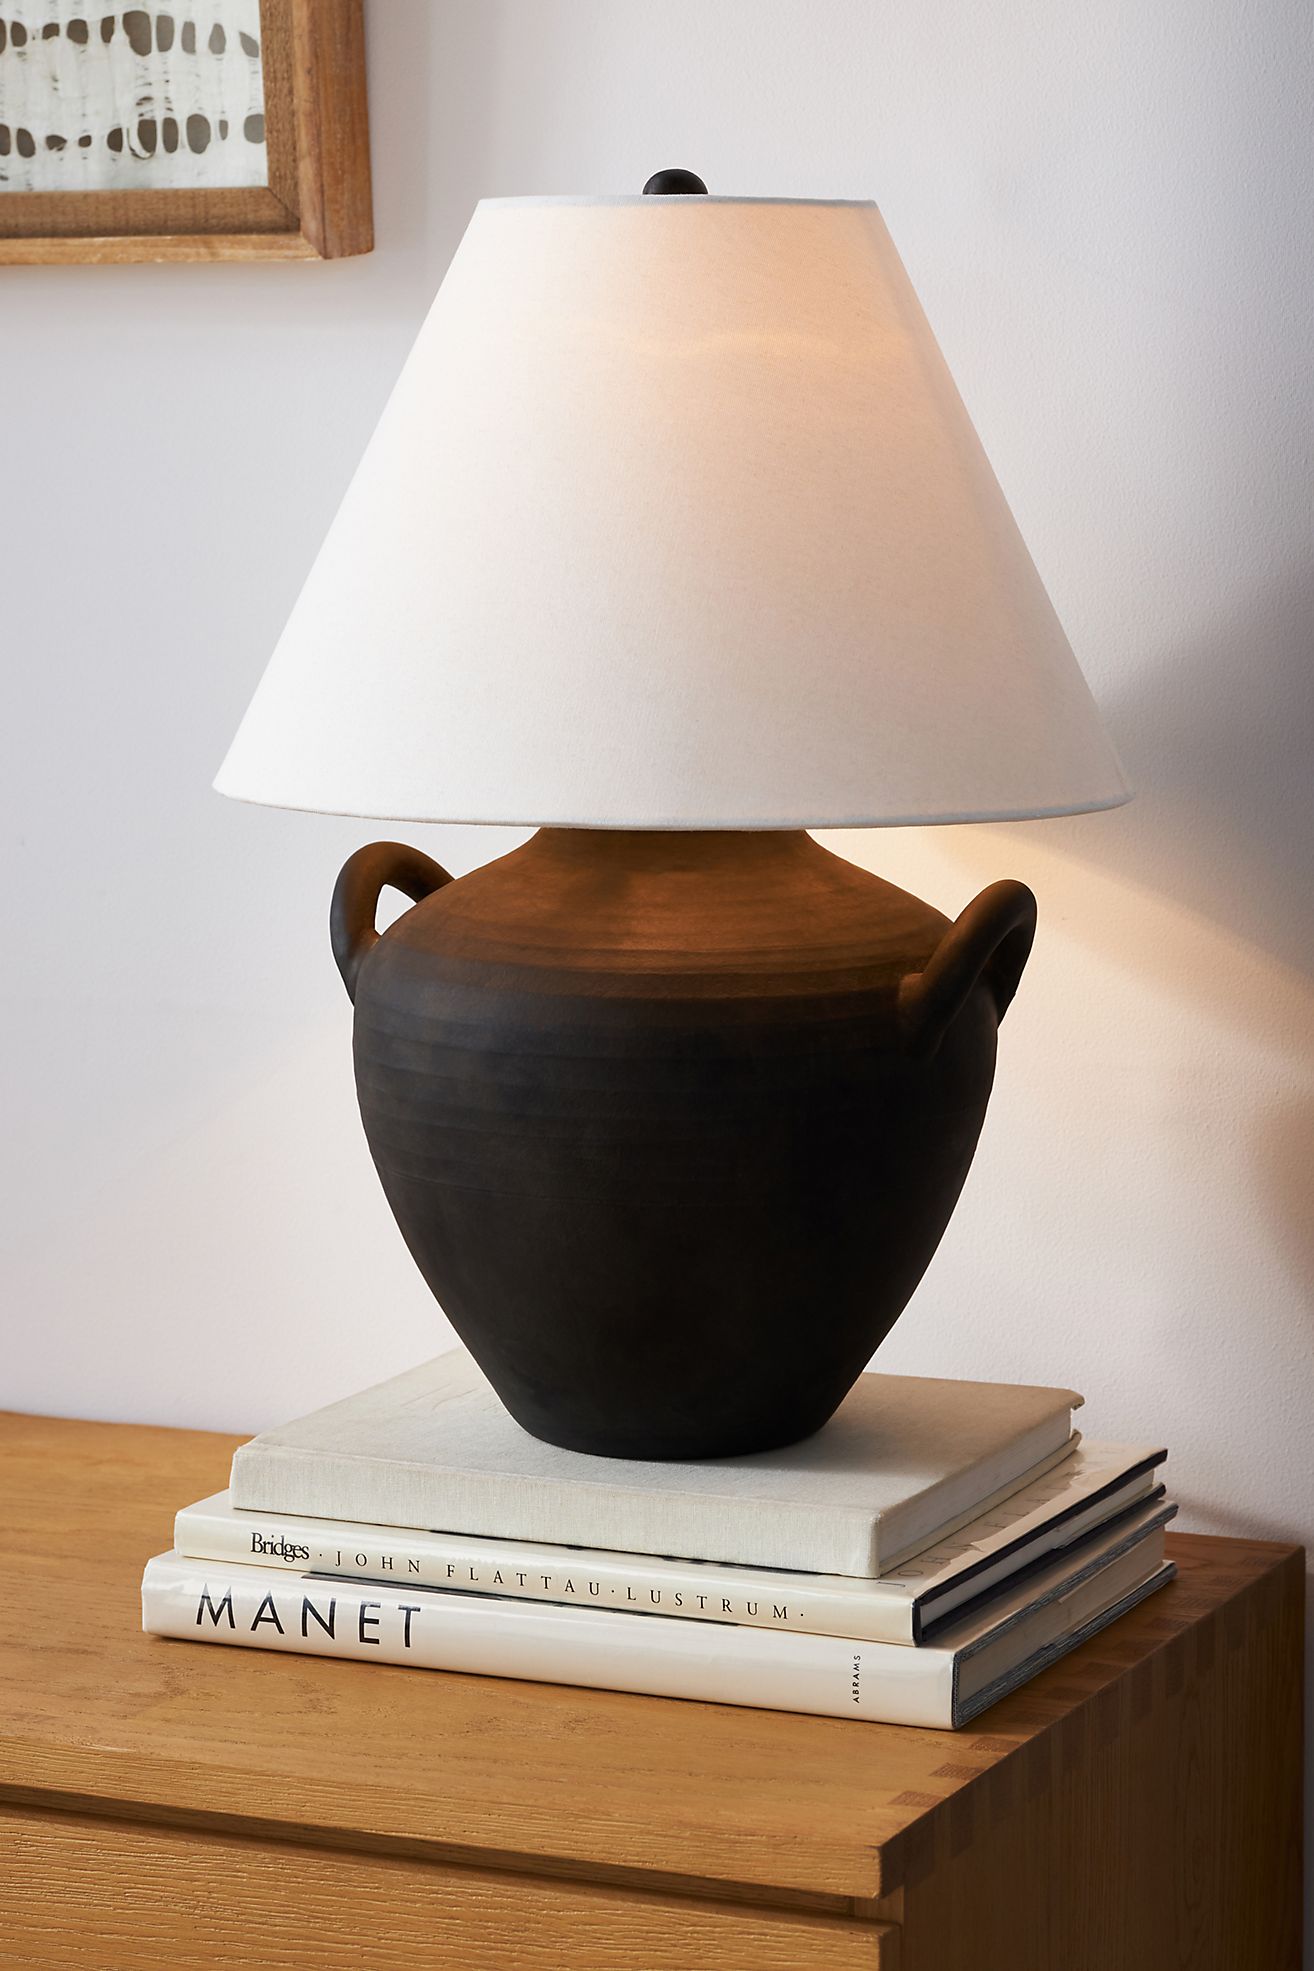 Anthro lamp from holiday sales worth noting